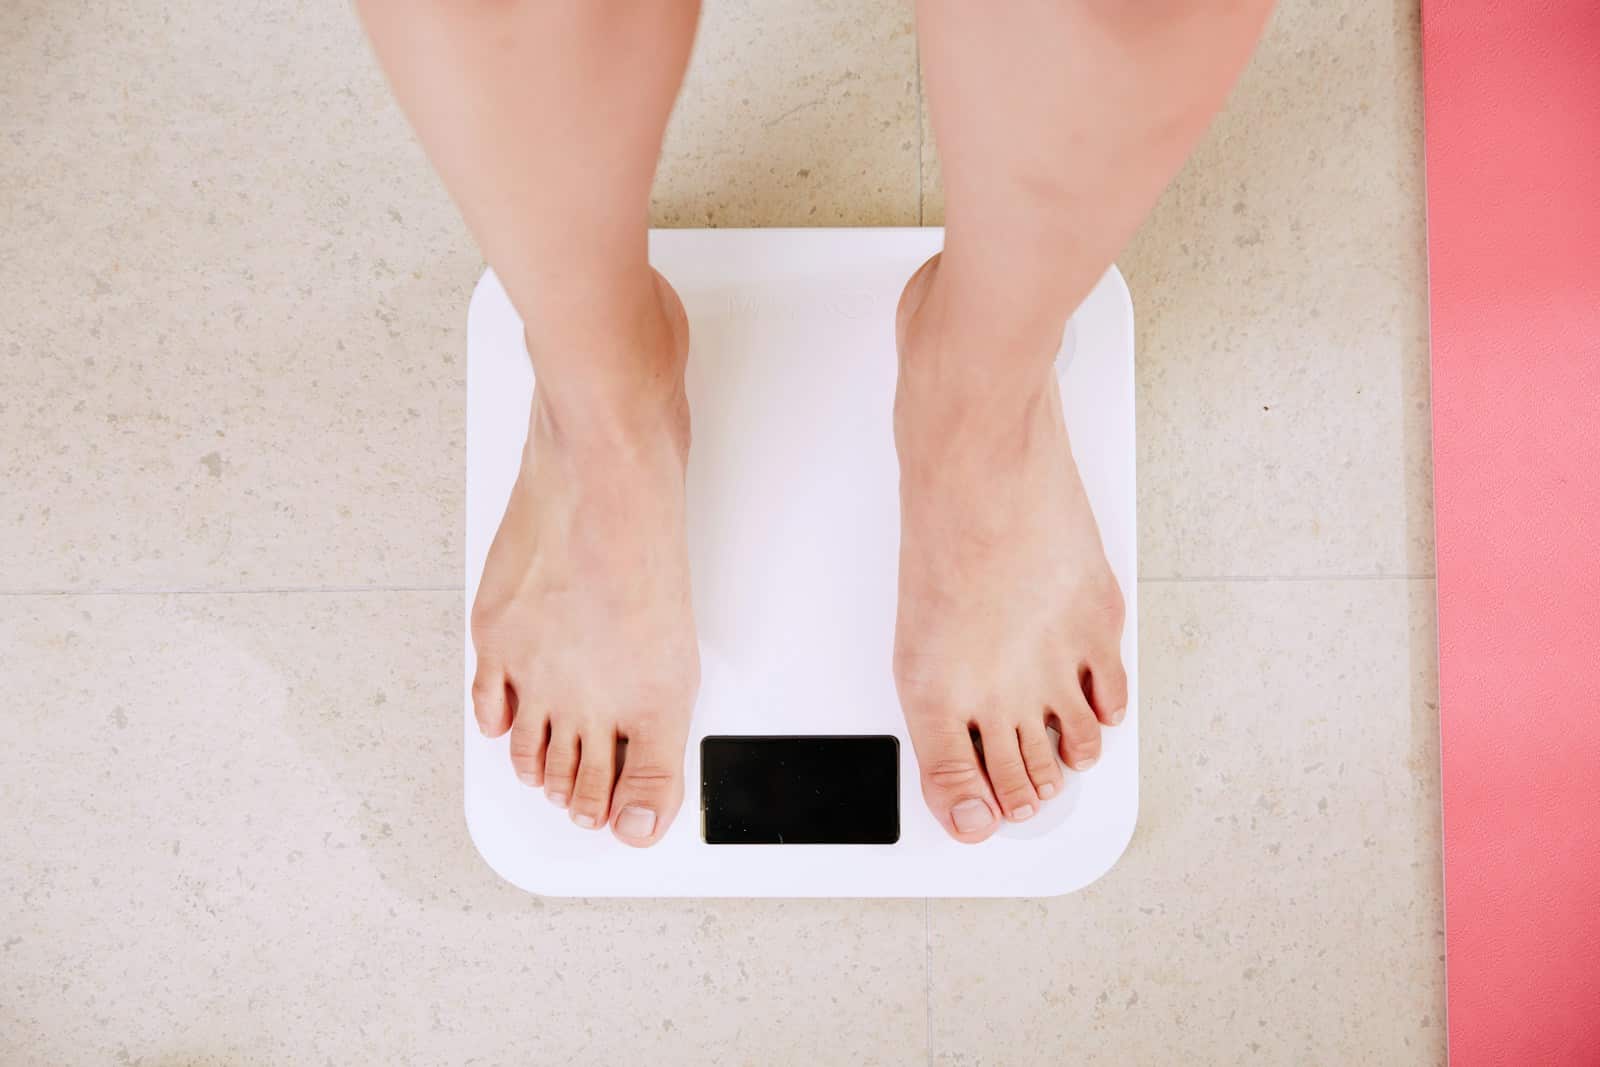 person standing on white digital bathroom scale. Dietician to help you eat better and lose weight naturally